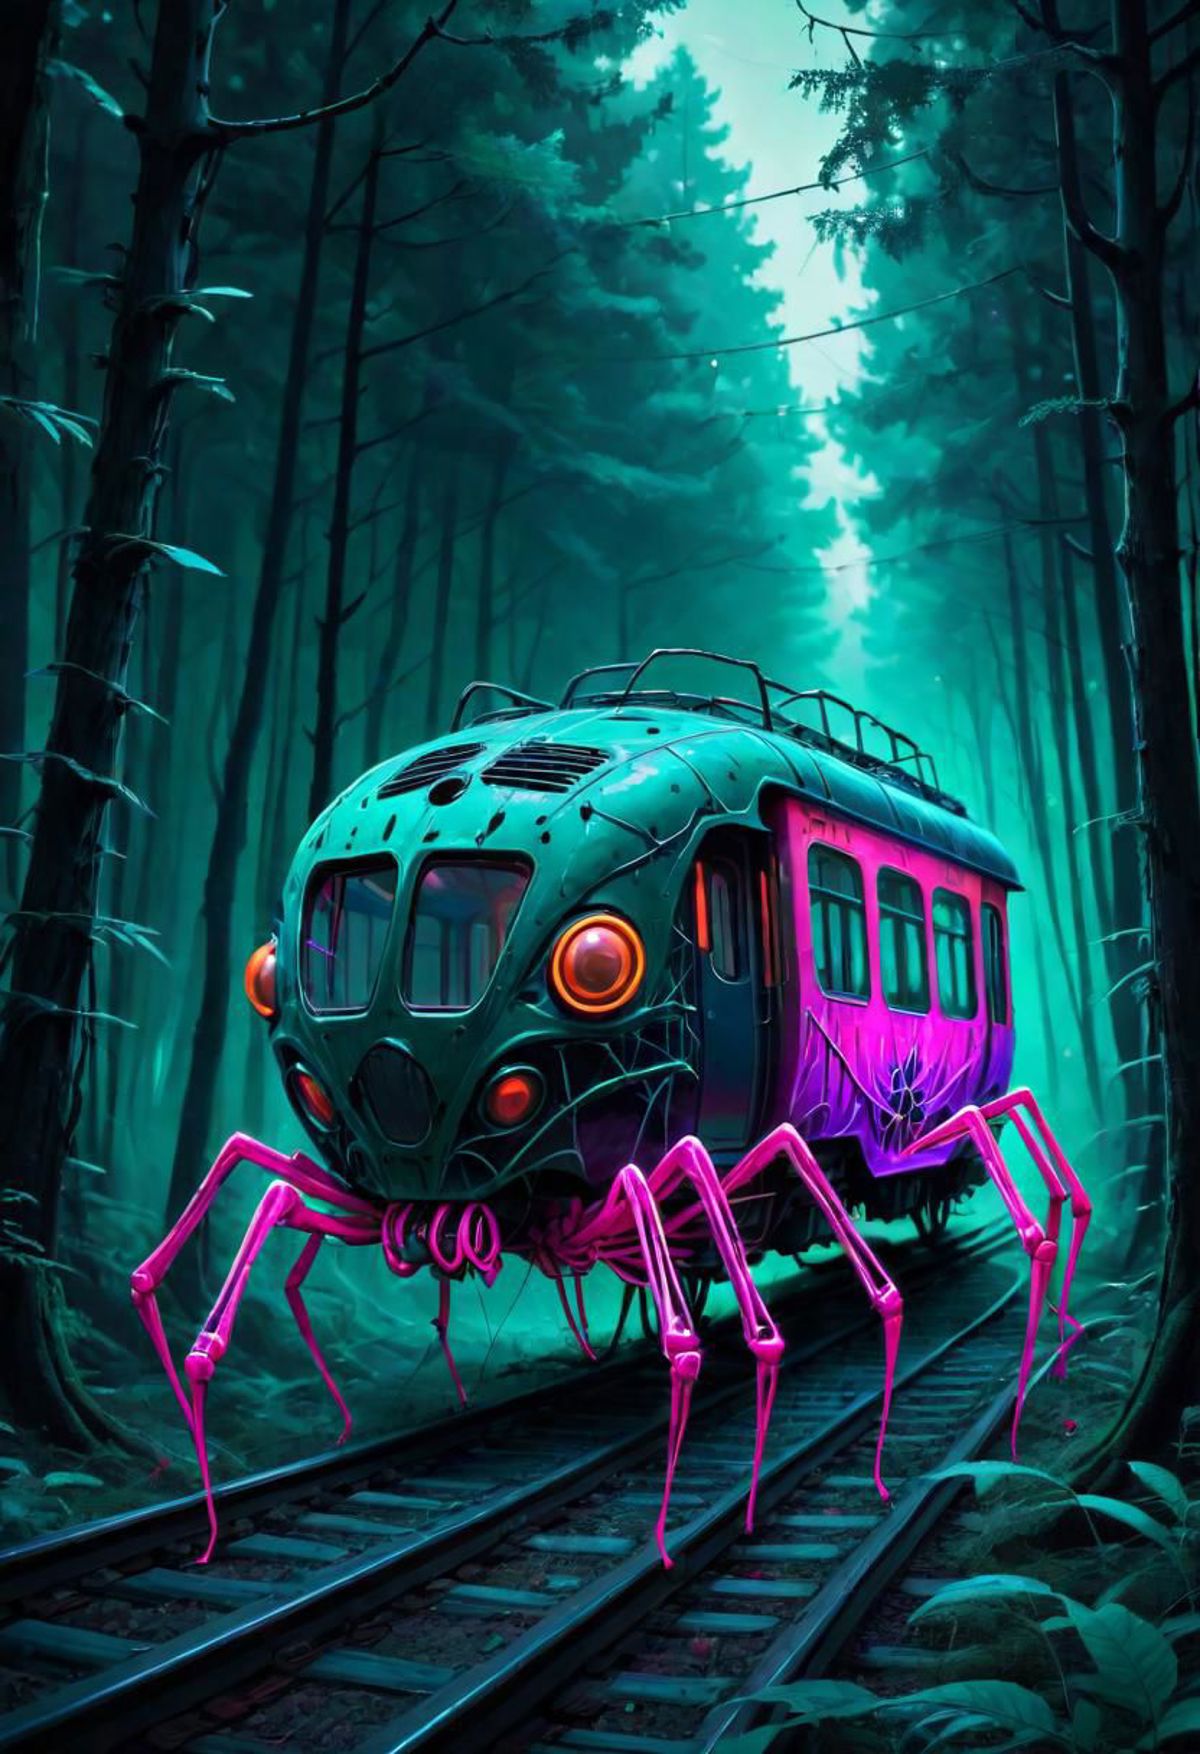 A purple and green train with spider legs and red eyes traveling through a forest at night.